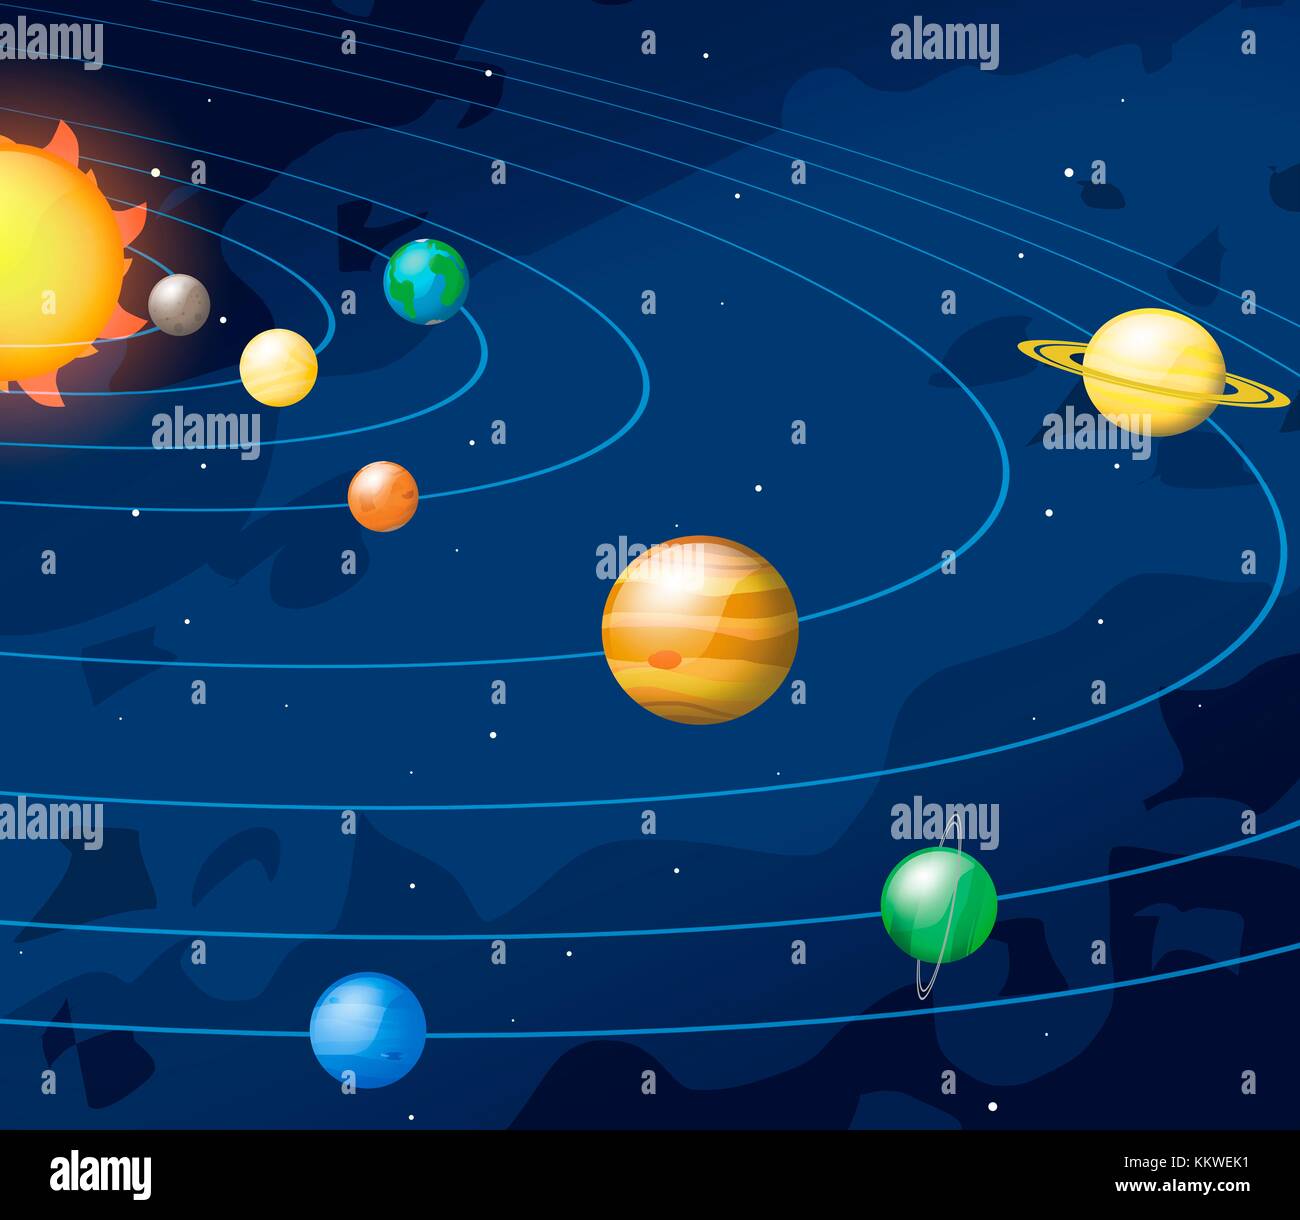 Cartoon Style Artwork Of The Solar System Showing The Paths Of